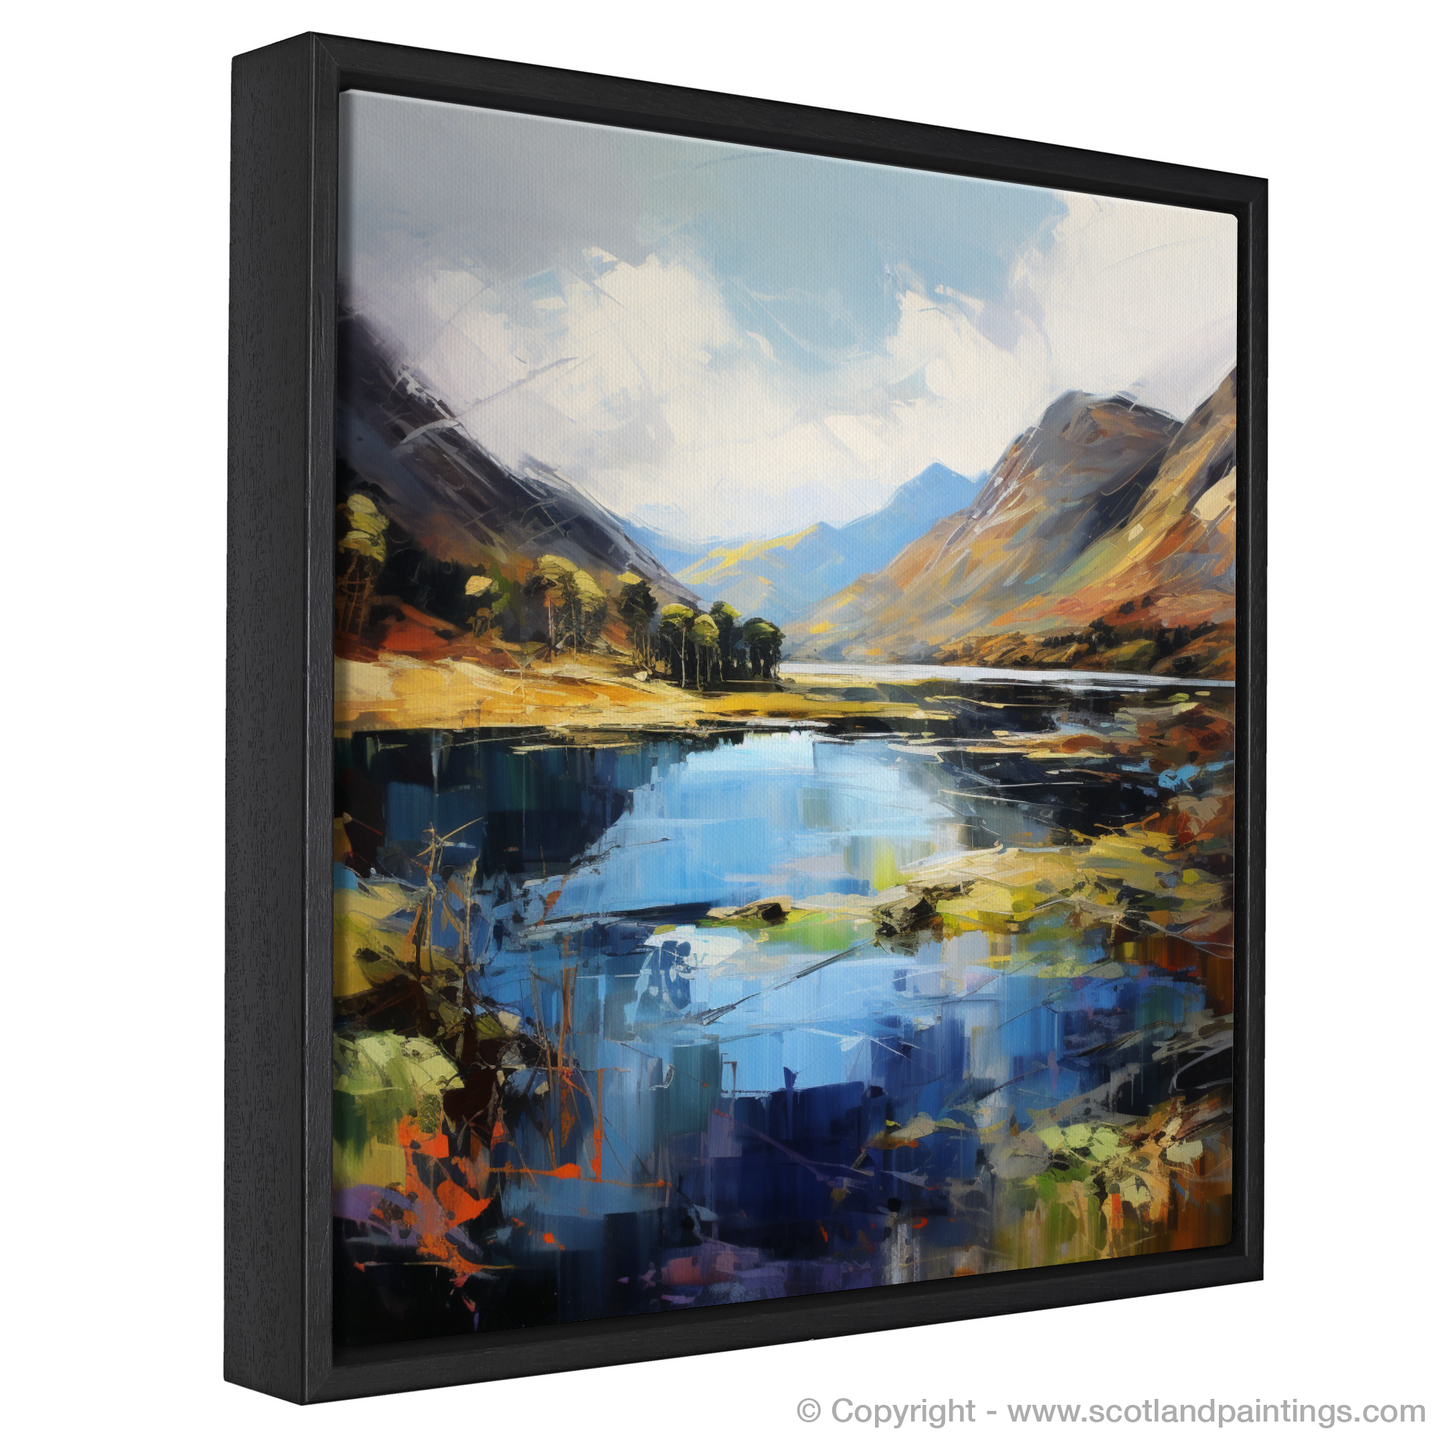 Painting and Art Print of Loch Shiel, Highlands entitled "Highland Serenade: An Expressionist Ode to Loch Shiel".